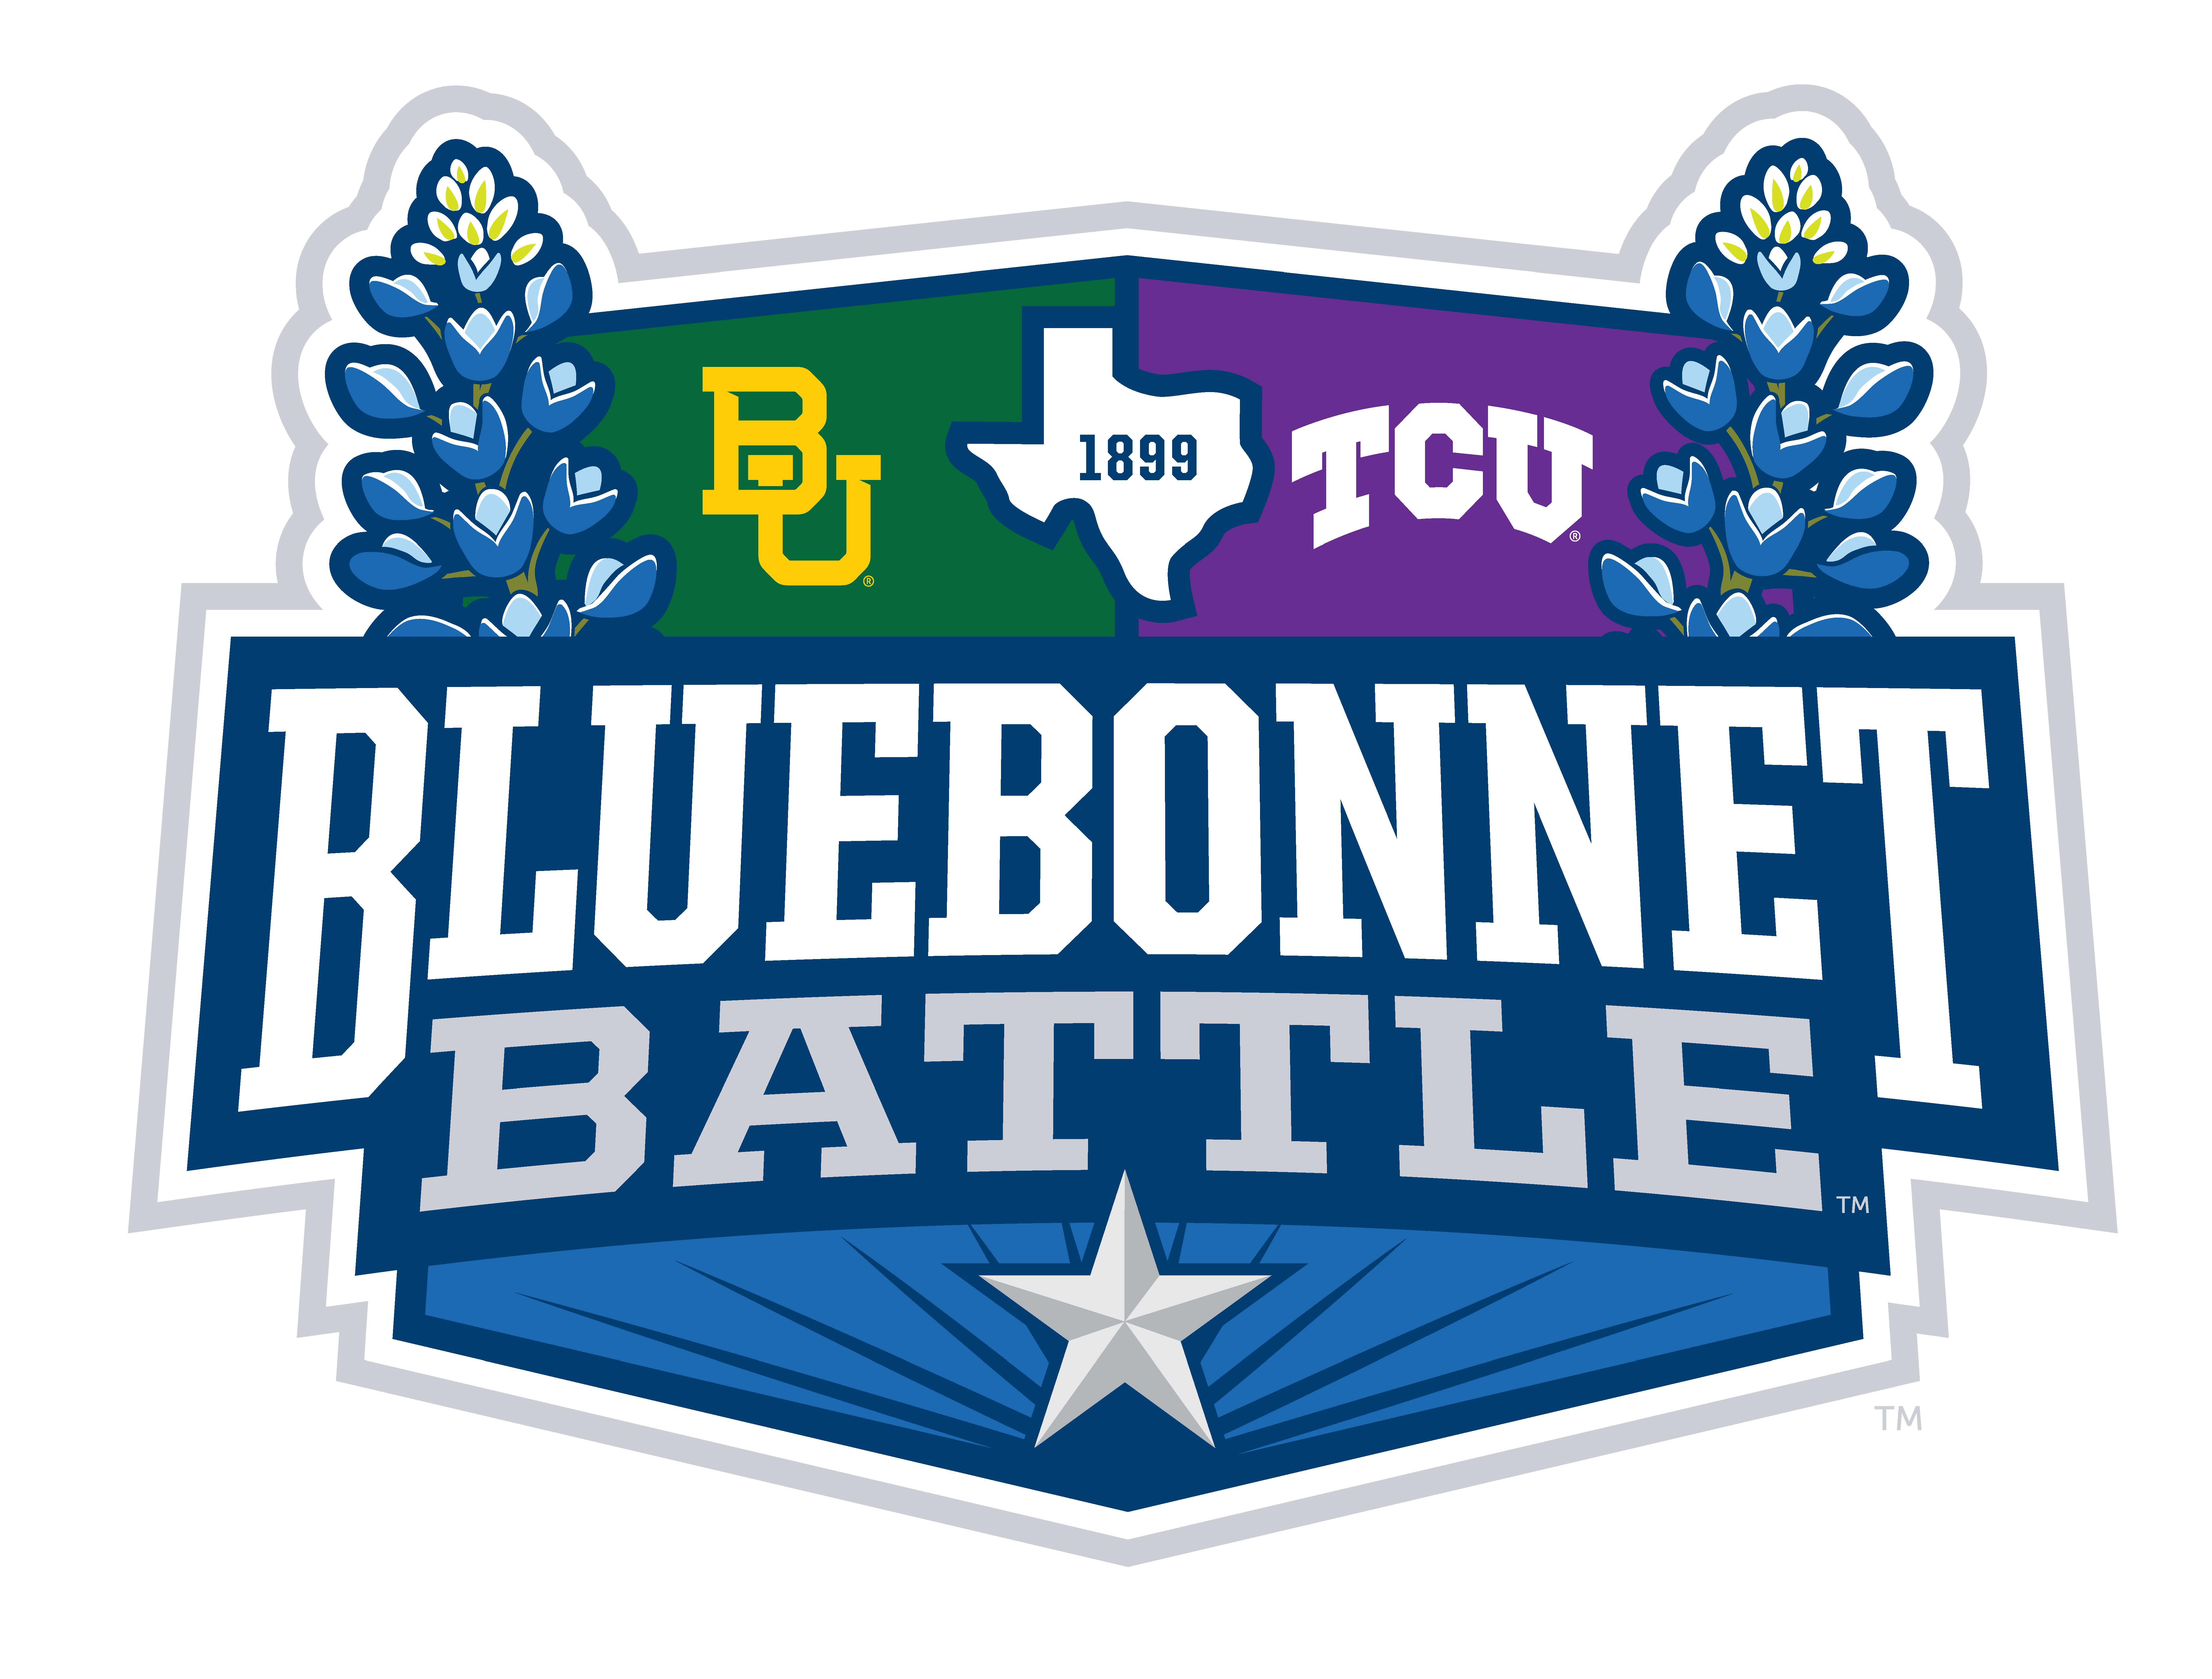 Bluebonnet Battle logo with BU and TCU, 1899 in the Texas state shape and a lone star at the bottom